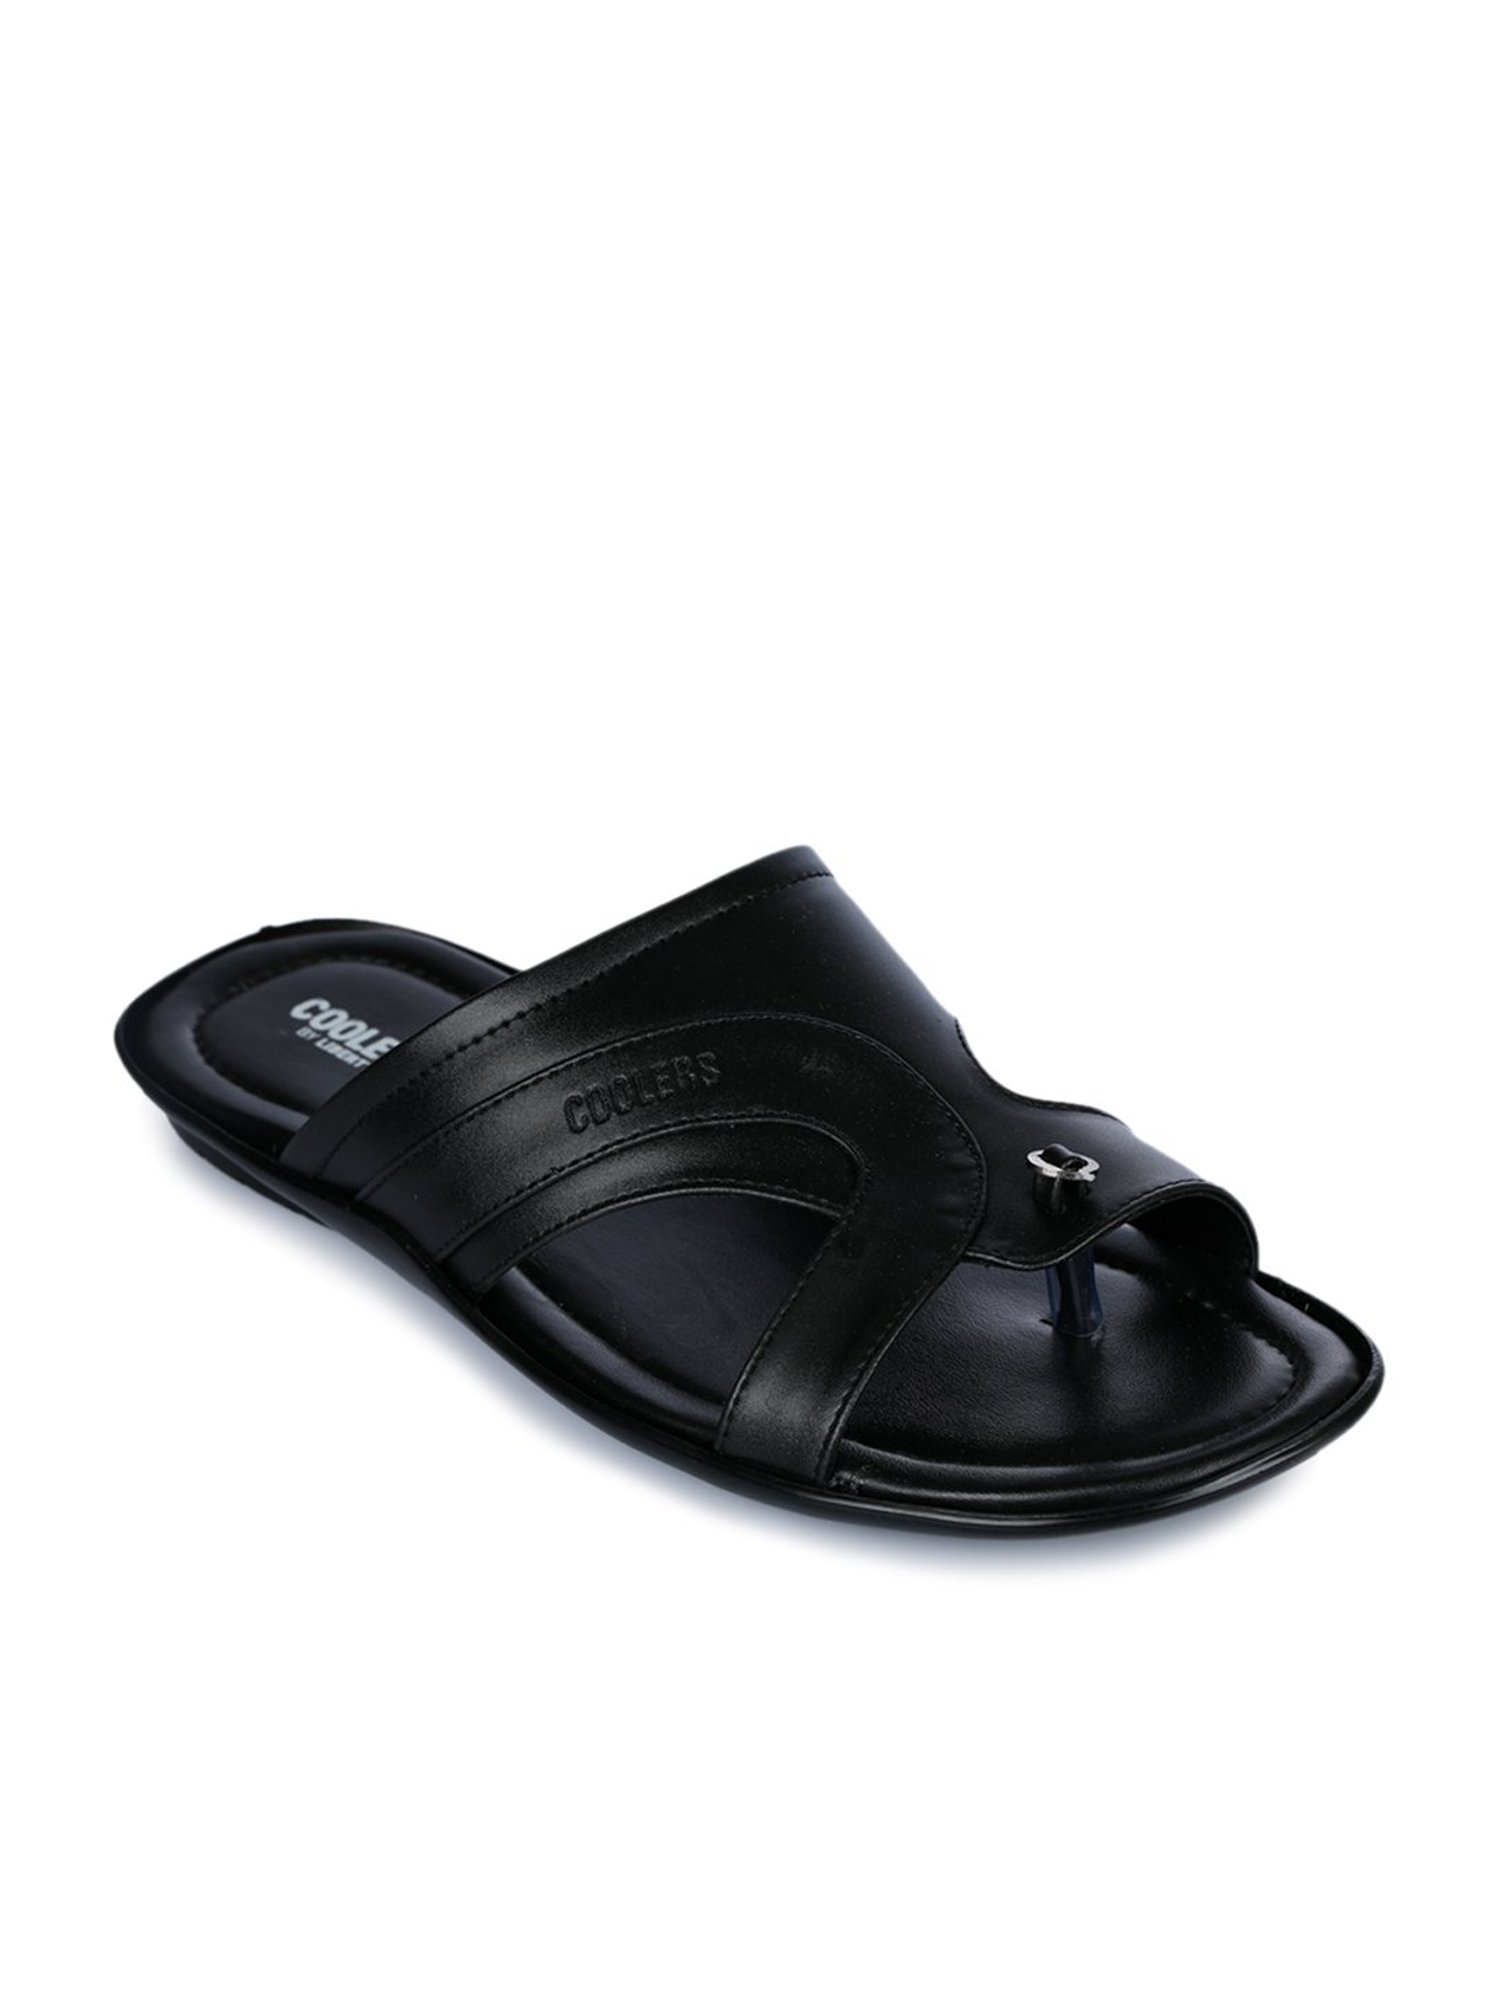 Coolers By Liberty Men-Sandals & Floater - Buy Coolers By Liberty Men- Sandals & Floater Online at Best Prices on Snapdeal